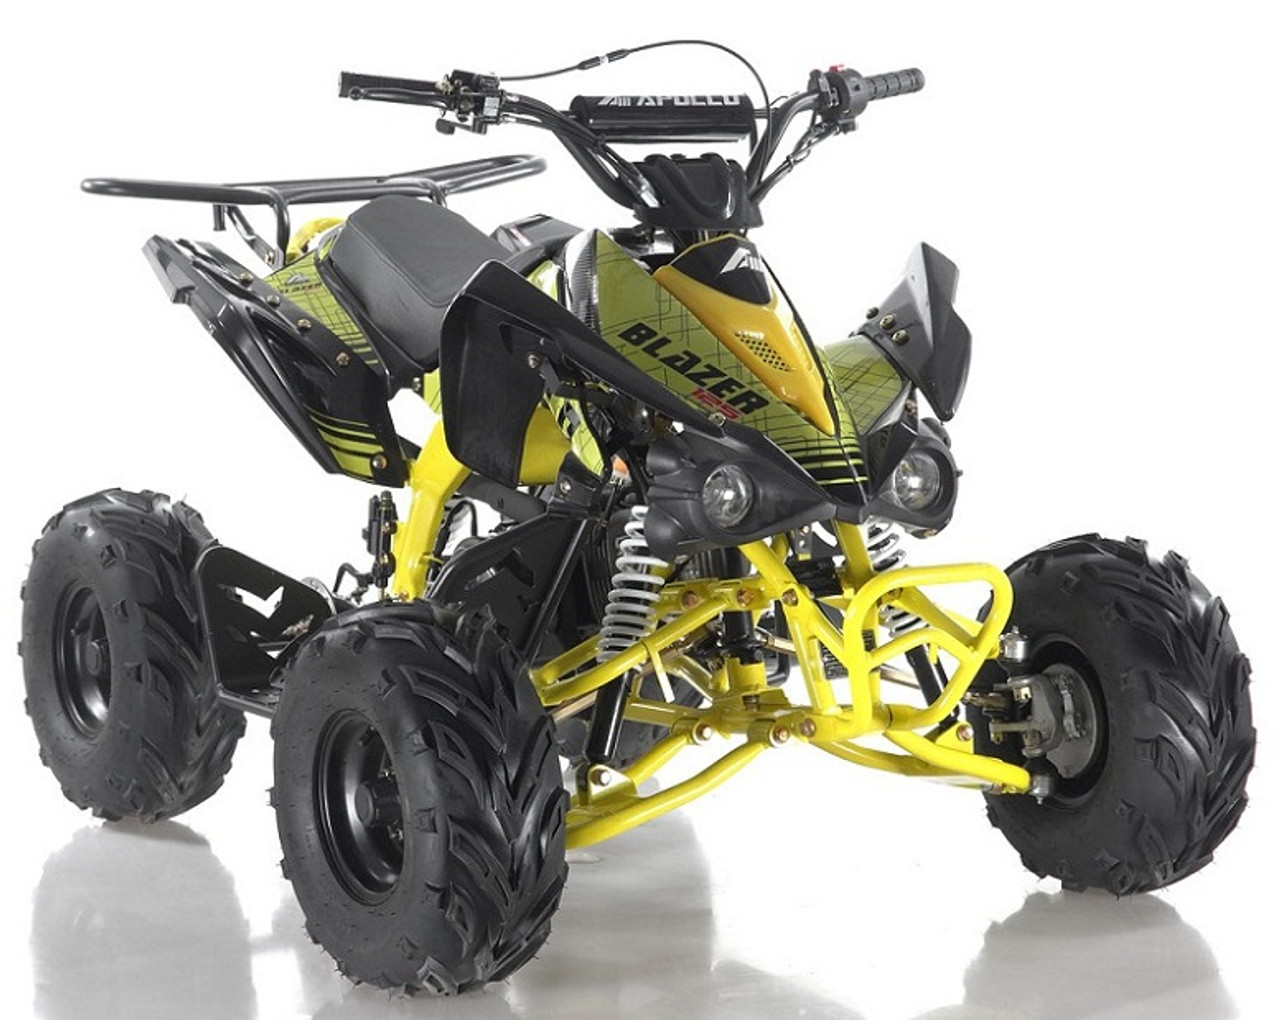 Apollo BLAZER 7 125cc ATV, 7" TIRE, Single Cylinder, Air Cooled, 4 Stroke - Fully Assembled and Tested (yellow)